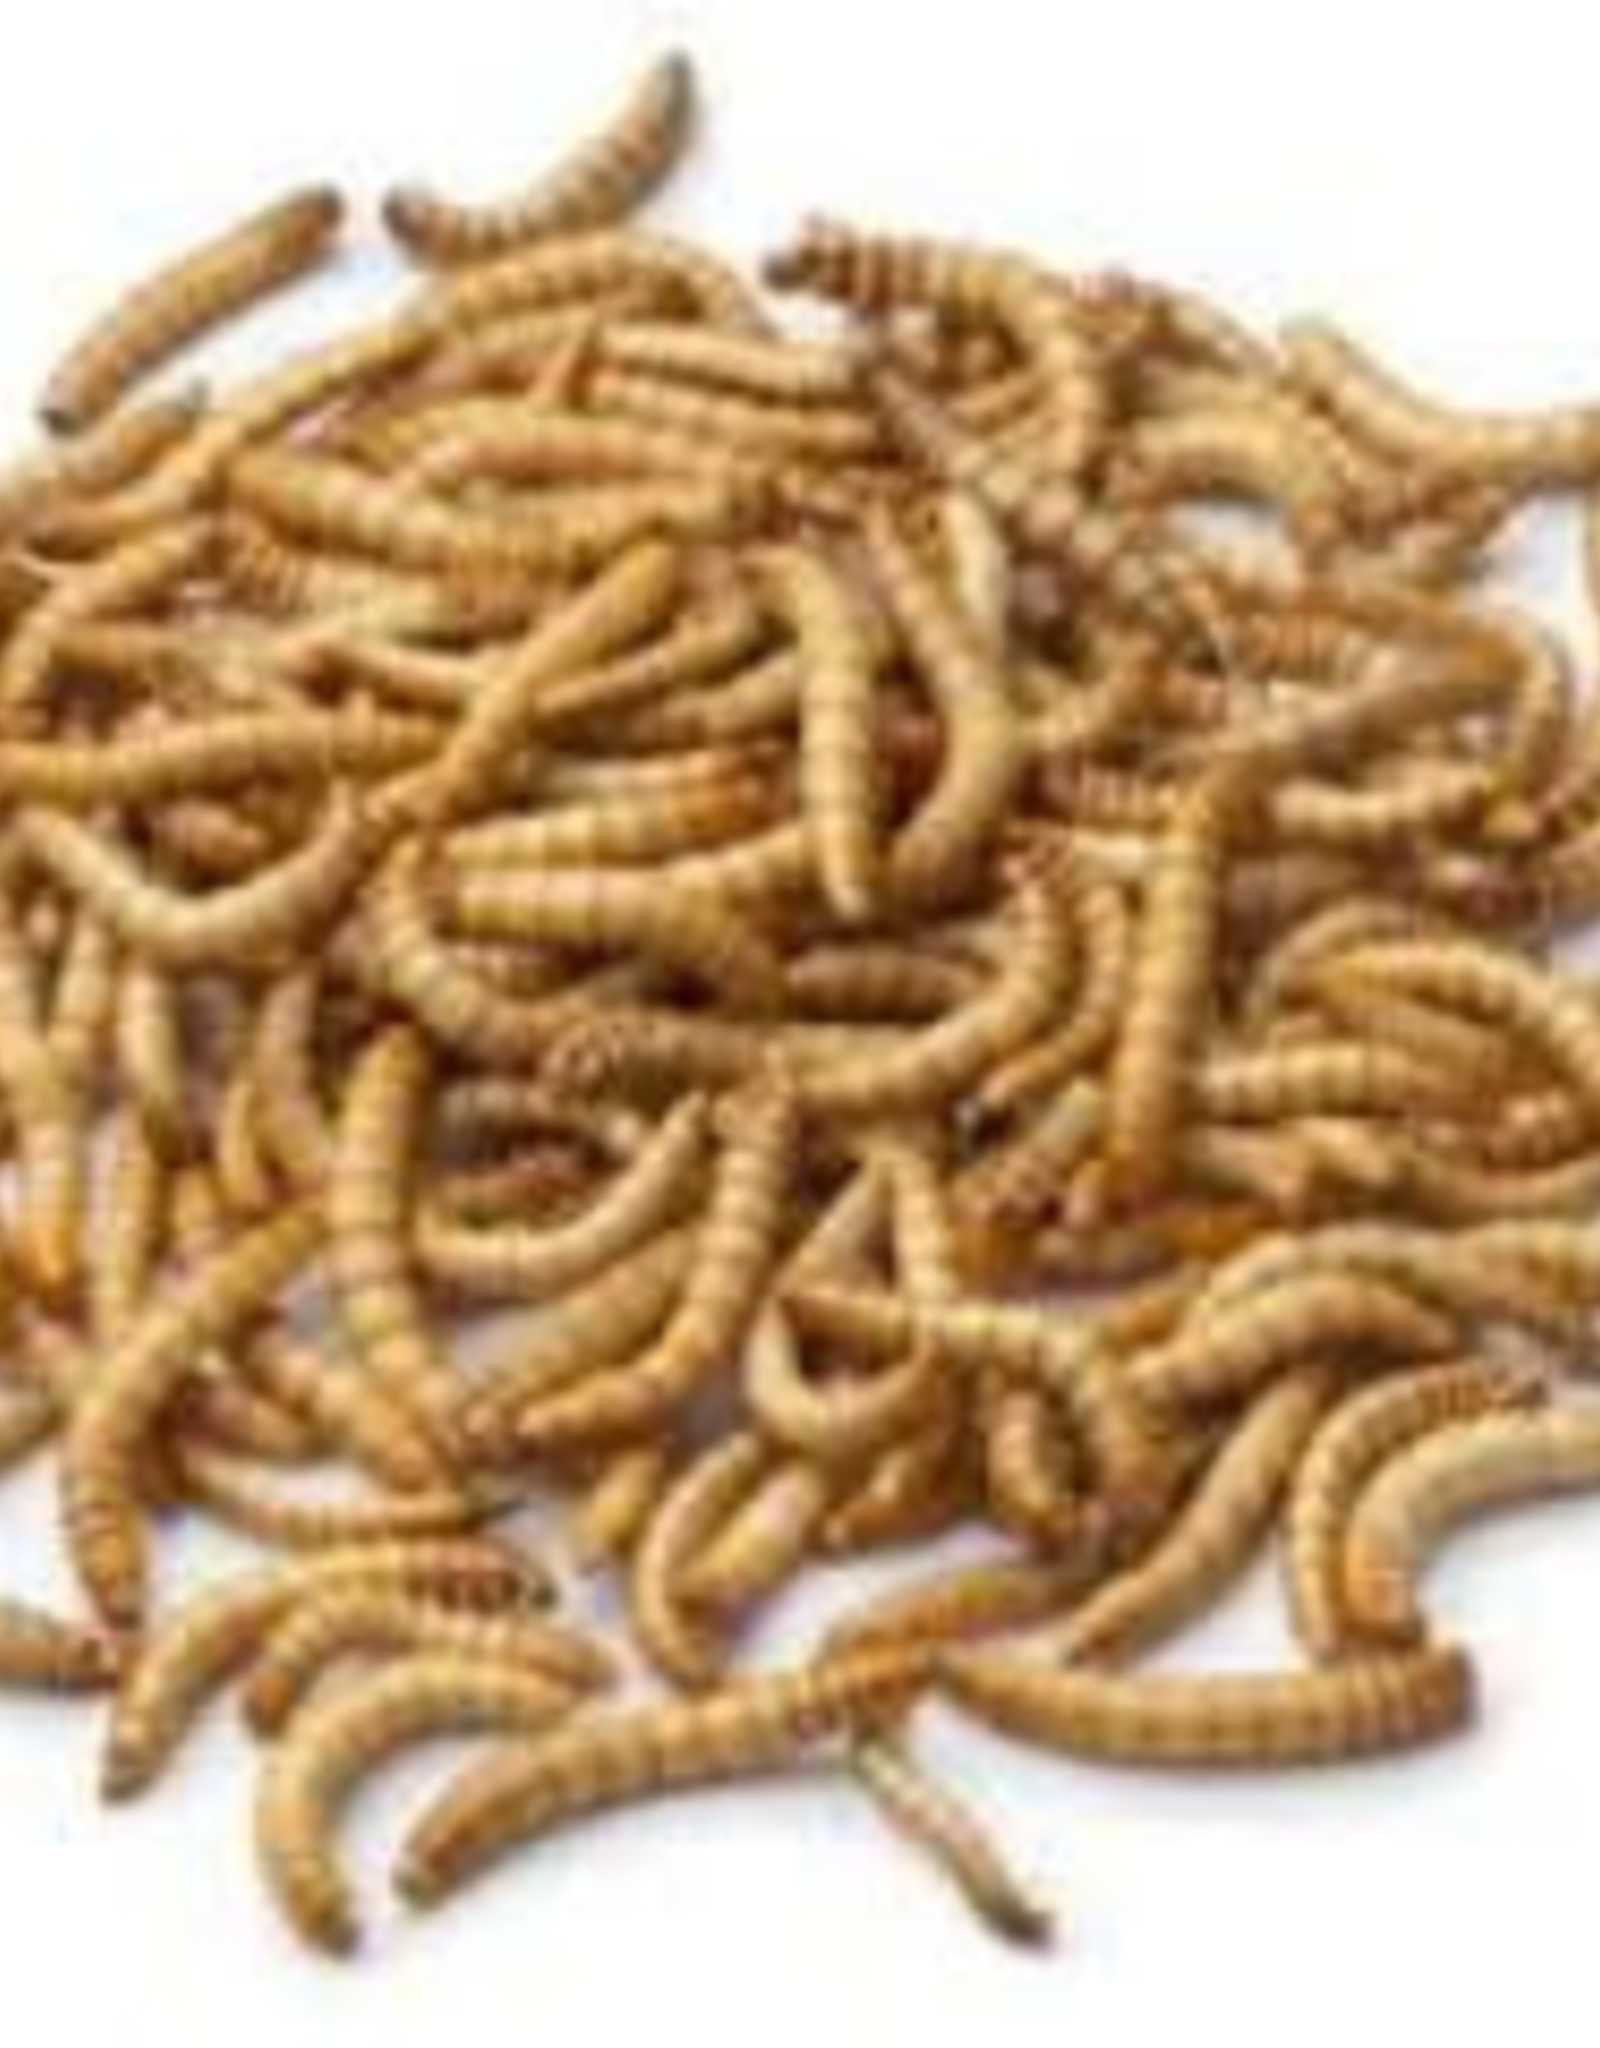 LIVE- MEALWORMS- 100 CT